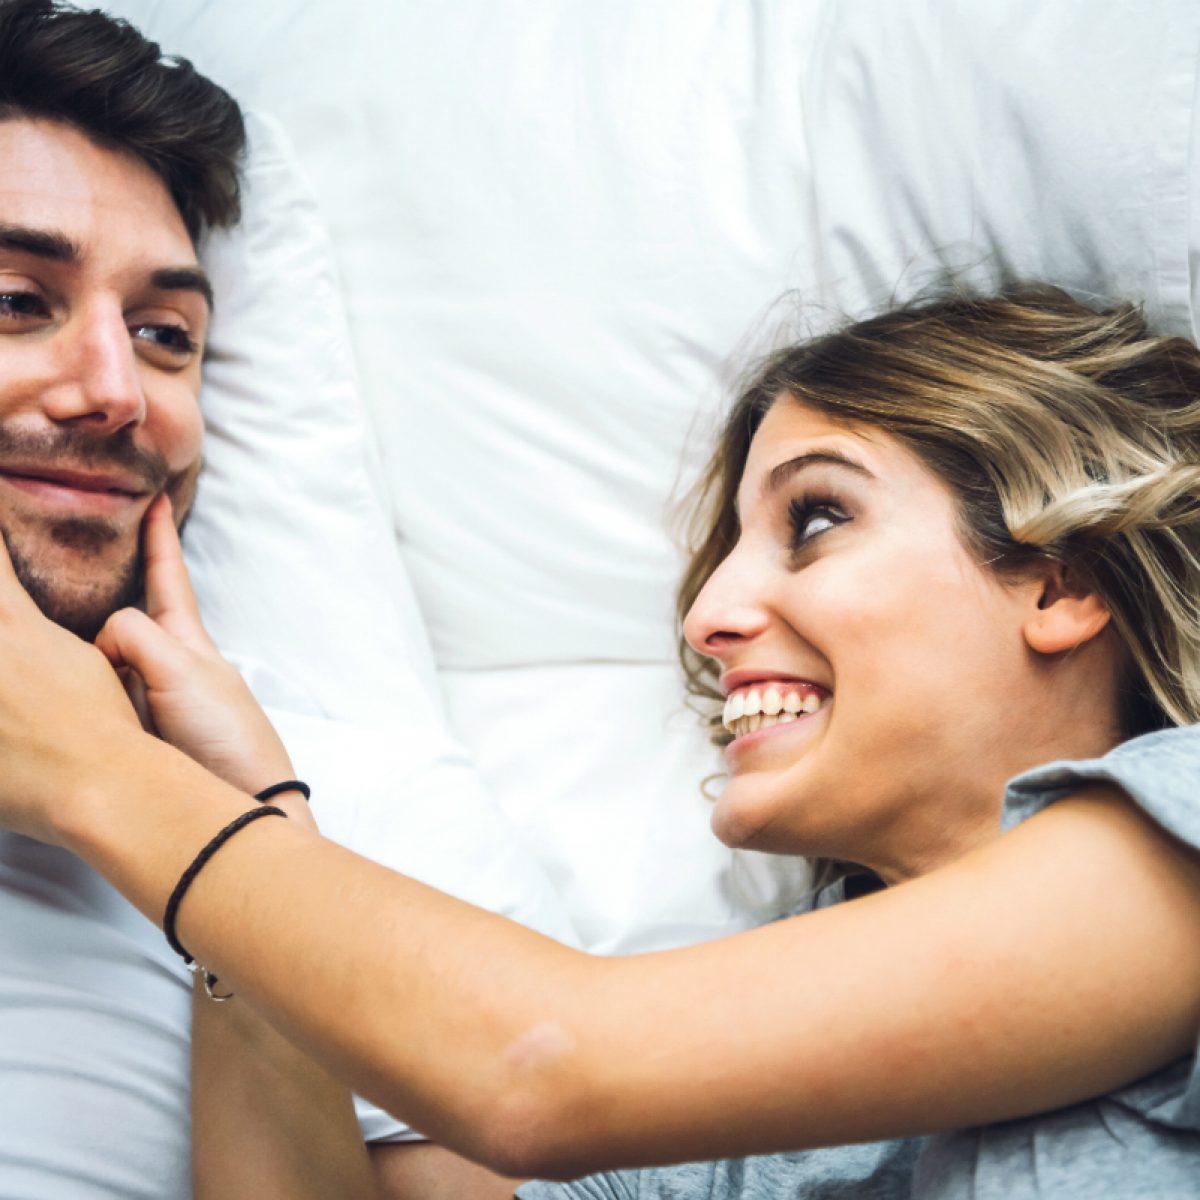 6 Embarrassing Things that Happen During Sex (That You Totally Shouldn’t Be  Embarrassed About)